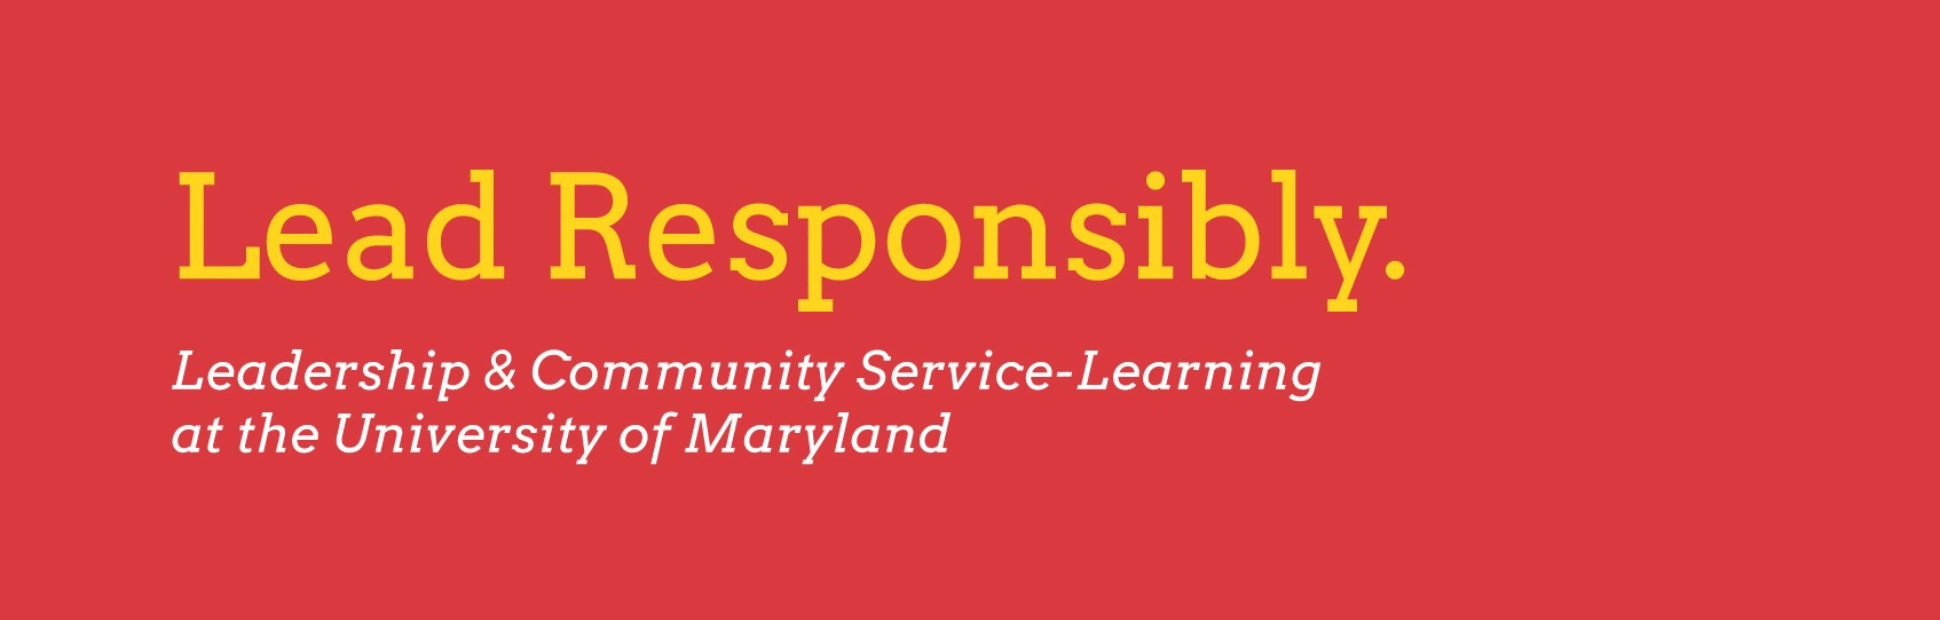 red background with yellow font reading "Lead Responsibly"